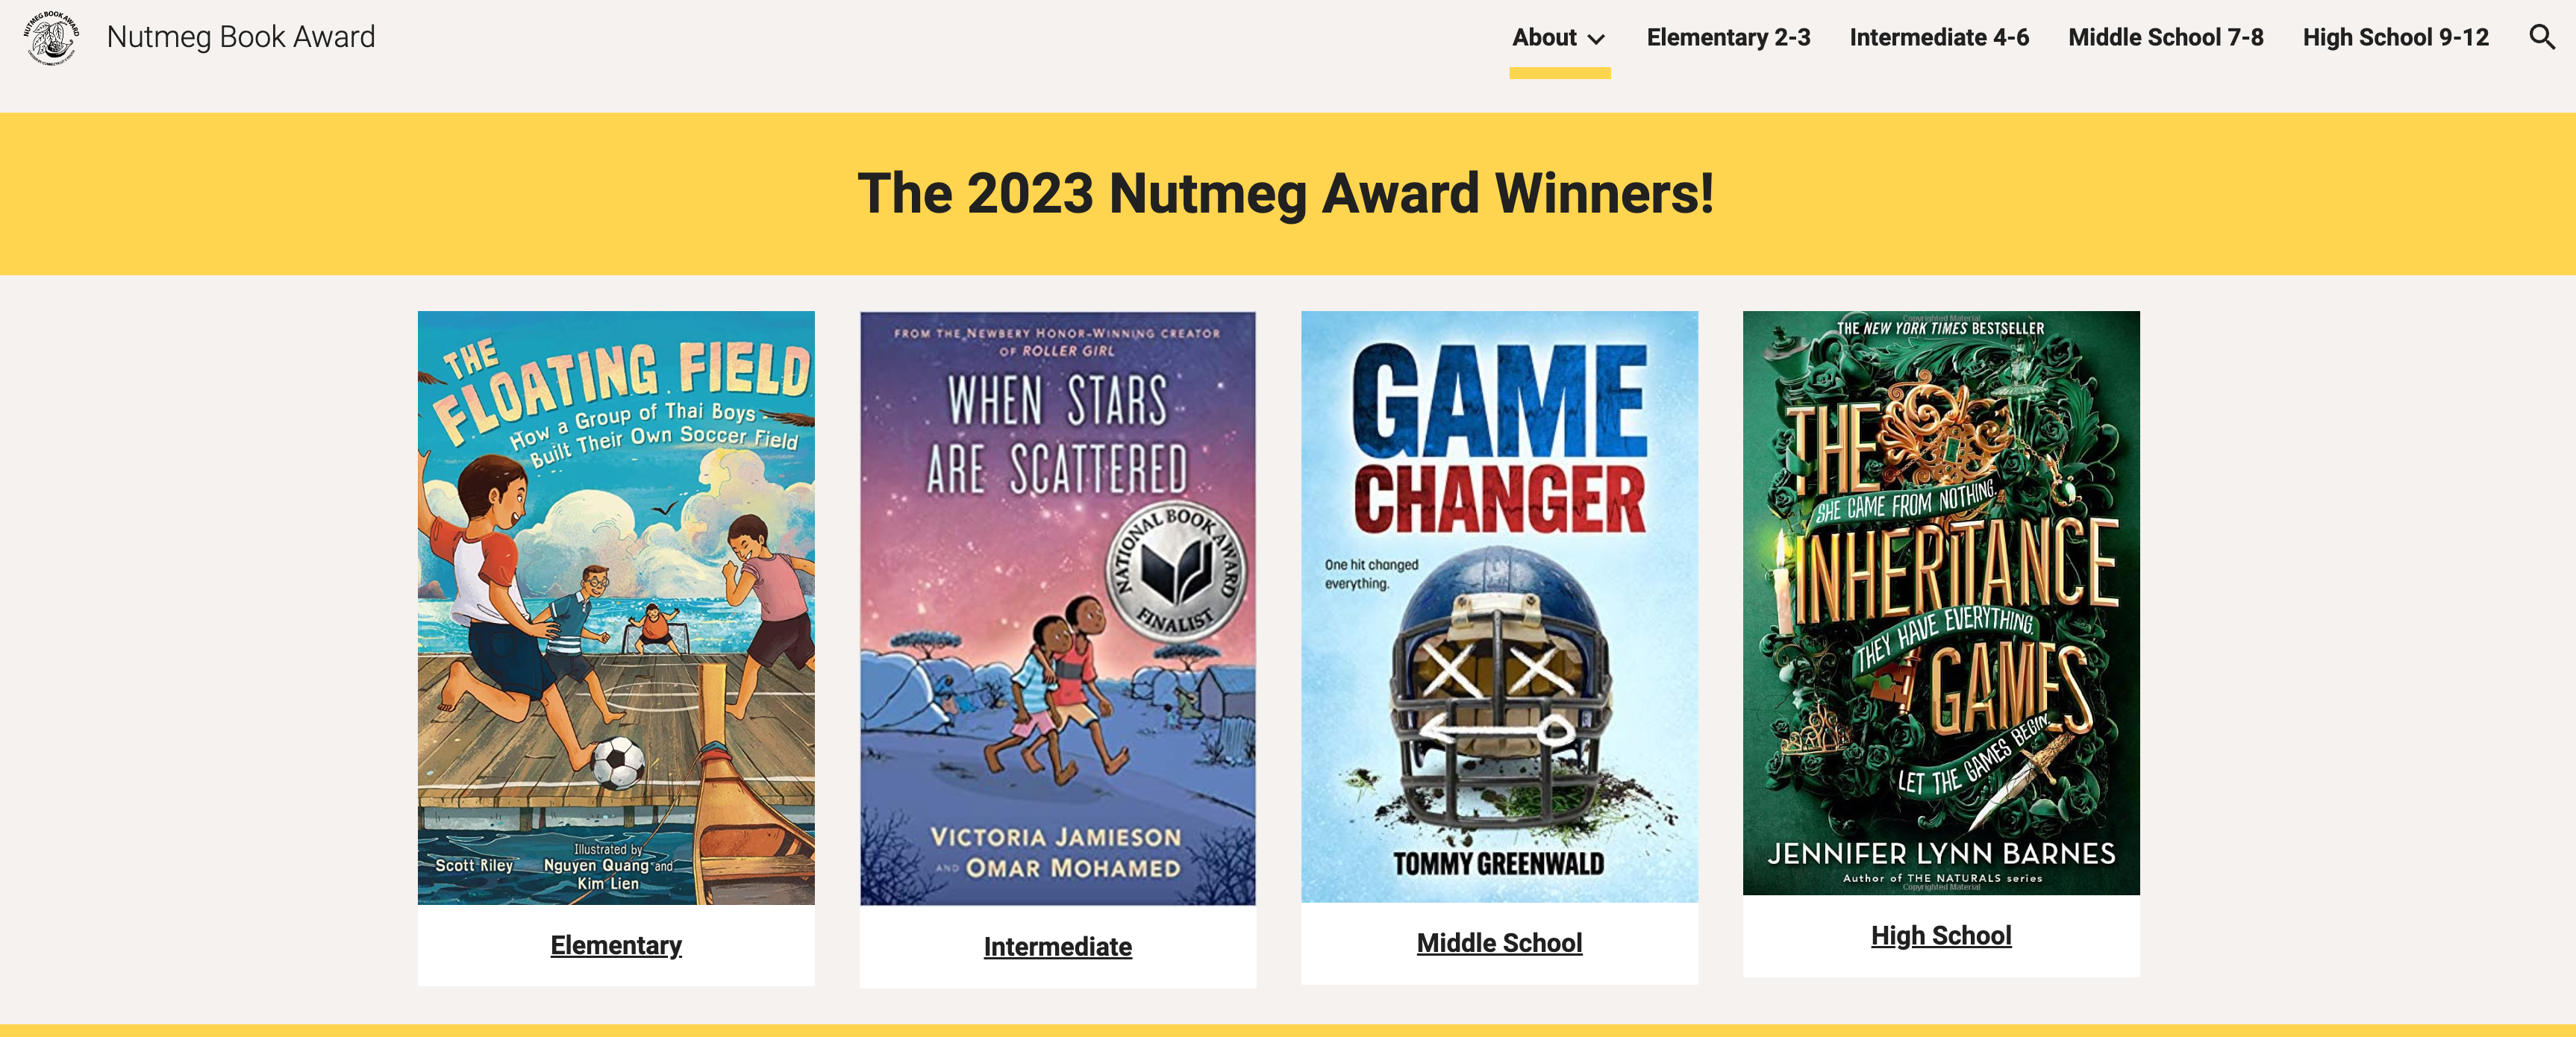 2021 Nutmeg Book Awards and 2022-2023 Nominees